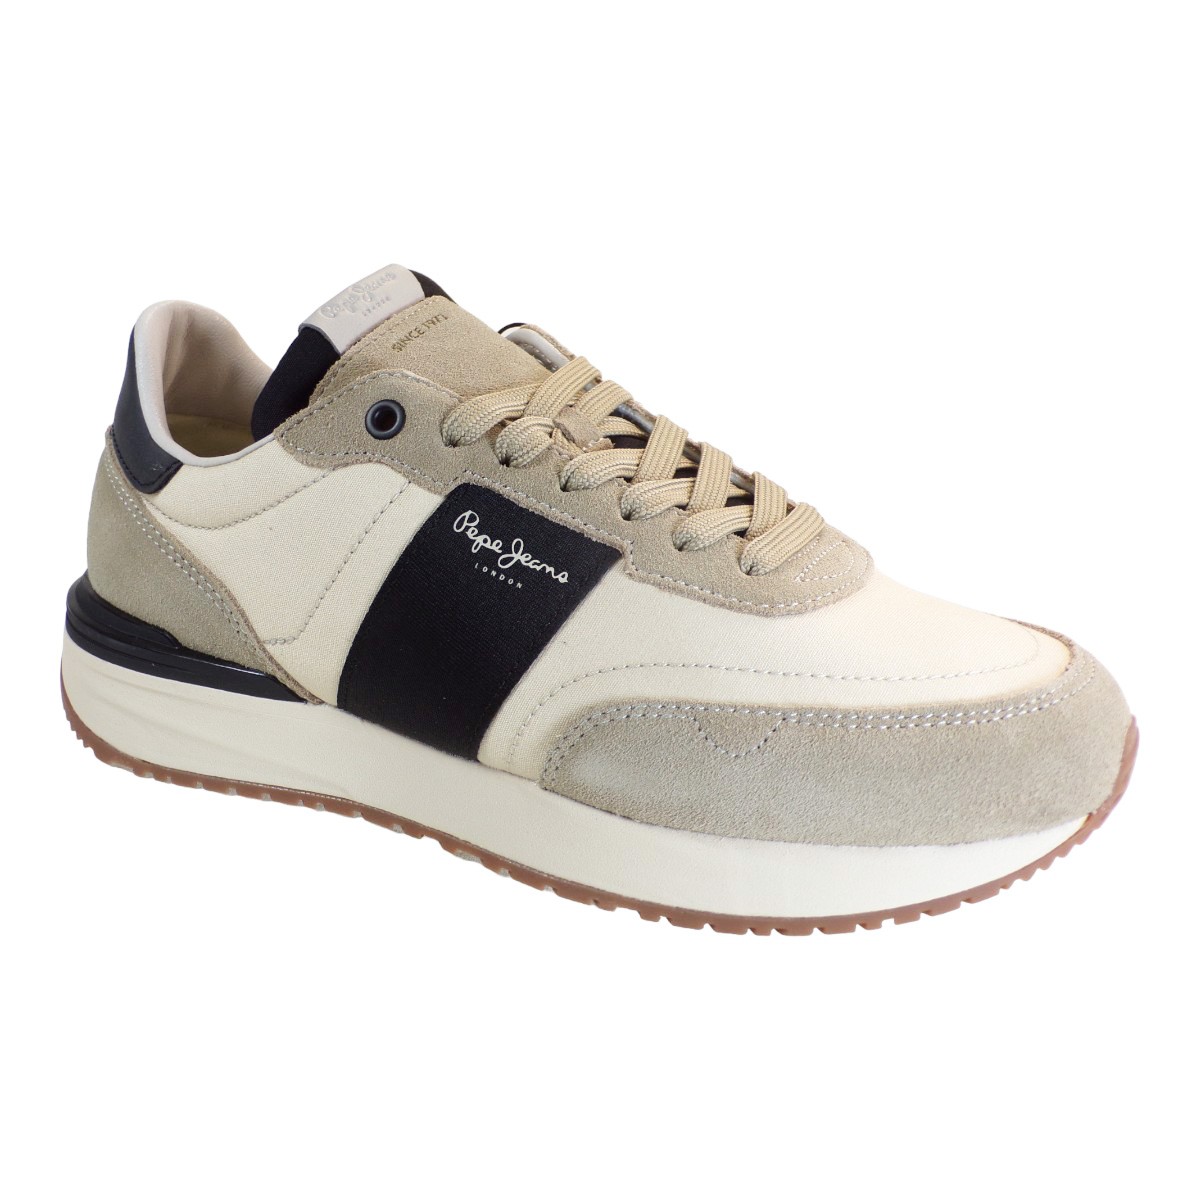 Pepe jeans BUSTER TAPE Sneakers Ανδρικά Παπούτσια PMS60006-844 Mπέζ Μπέζ